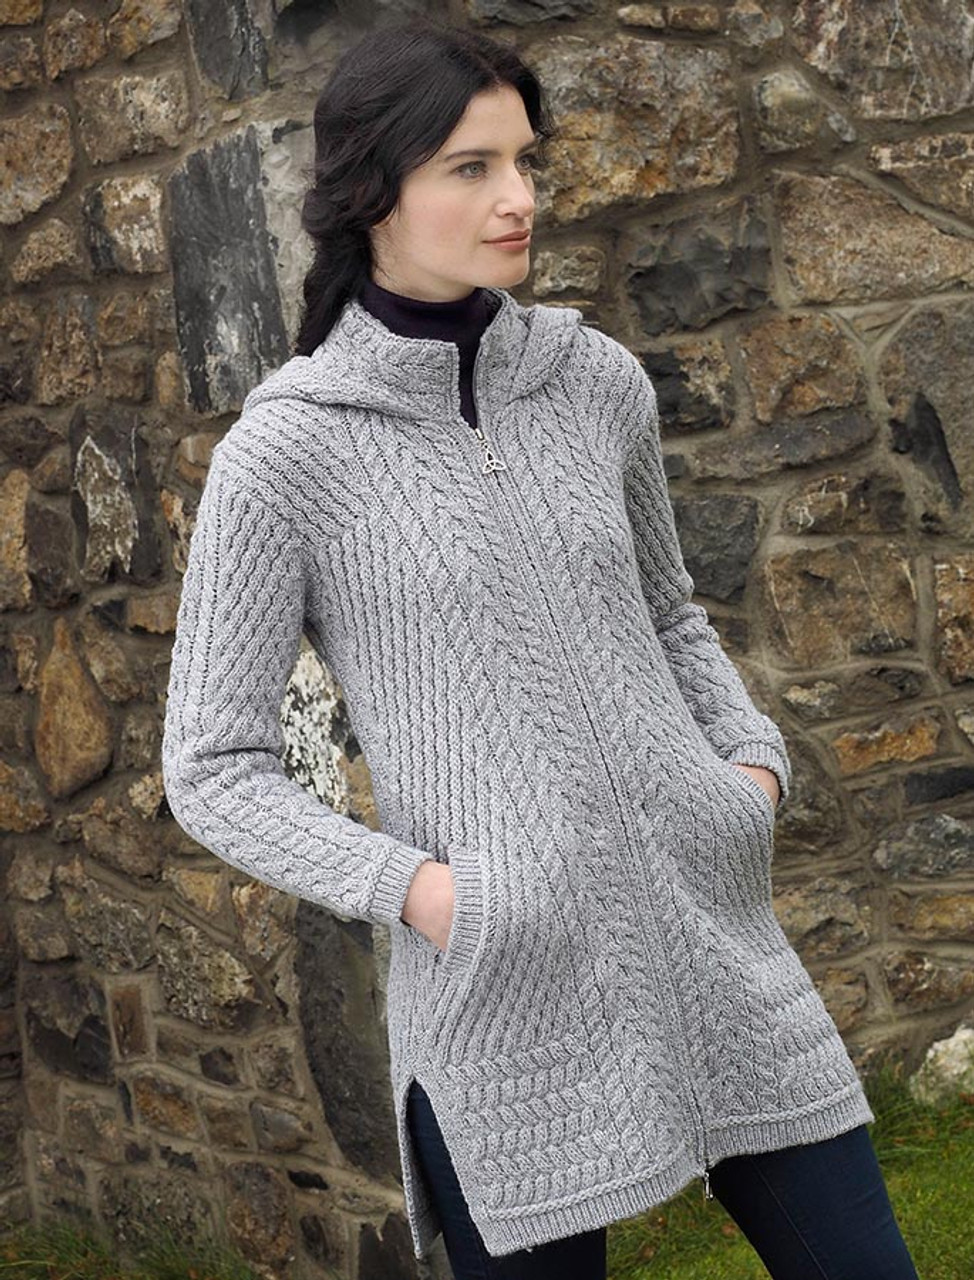 Ladies Soft Wool Gray Sweater - Made in Ireland - Fast Shipping from US